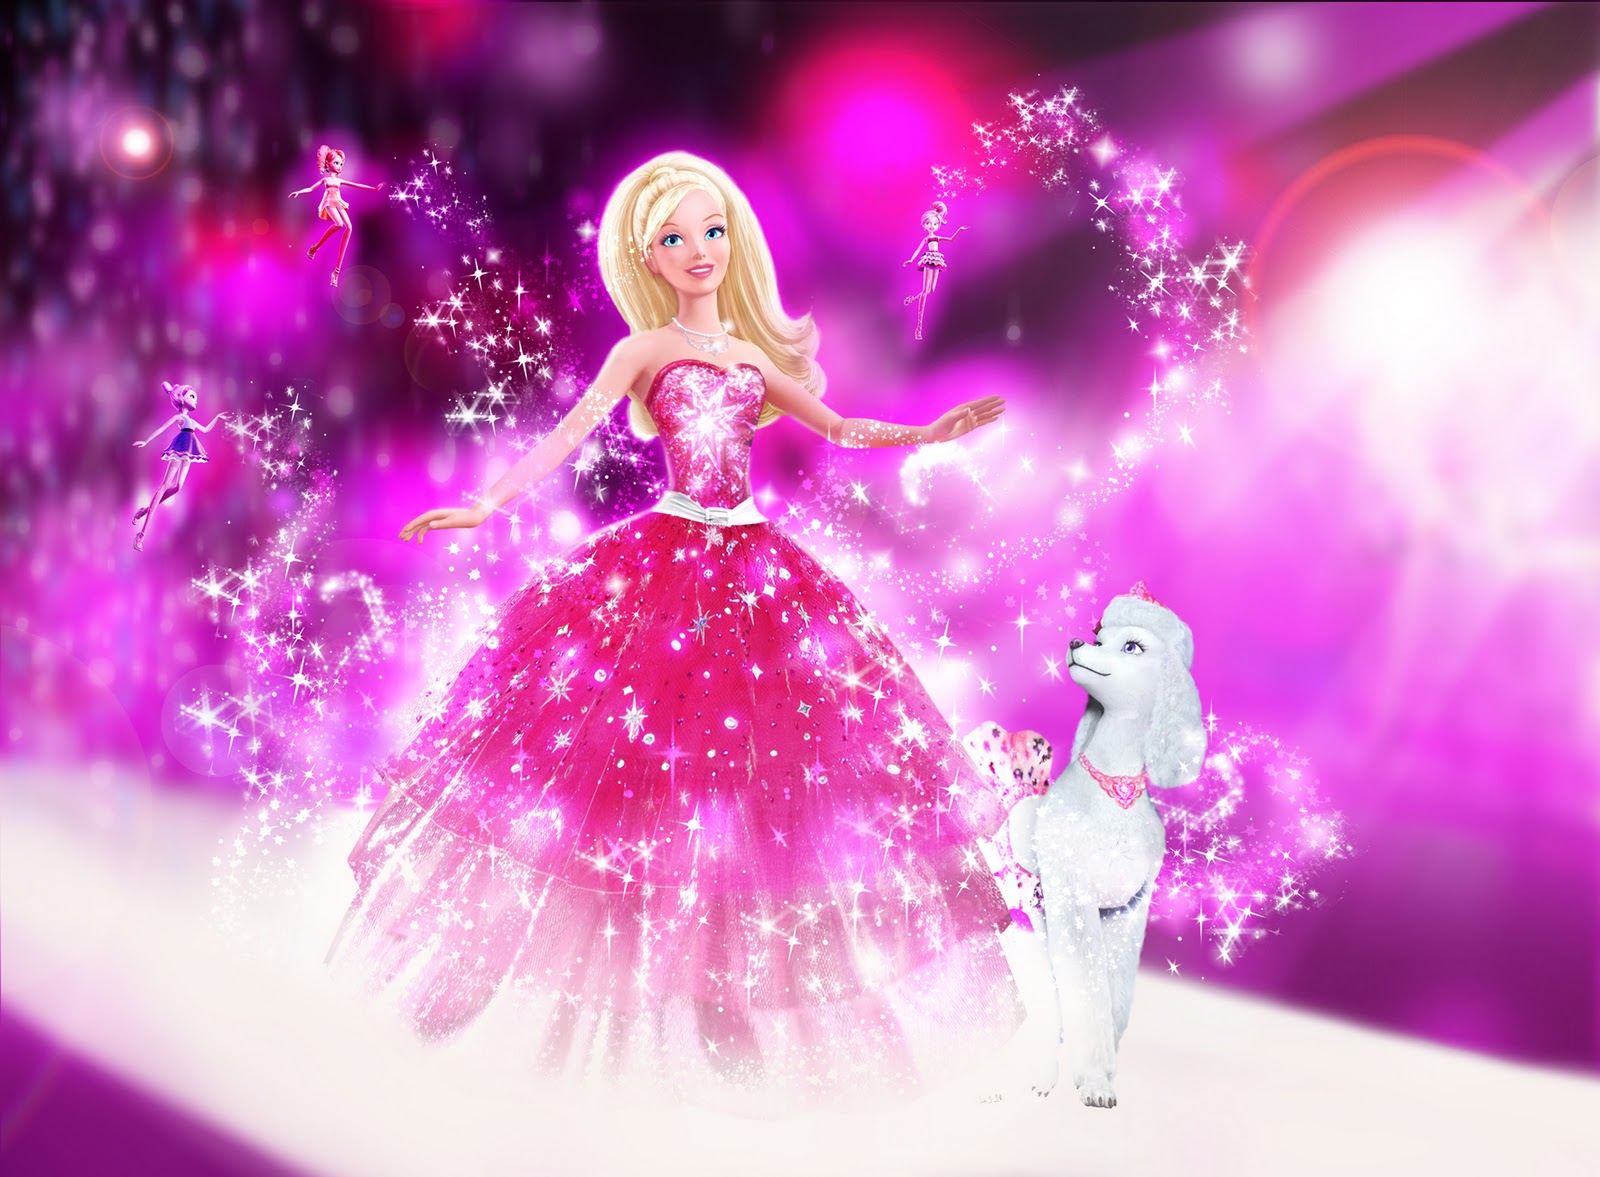 Shiny Lights Faint Blue Pink Princess Background Cartoon Shiny Princess  Background Image And Wallpaper for Free Download